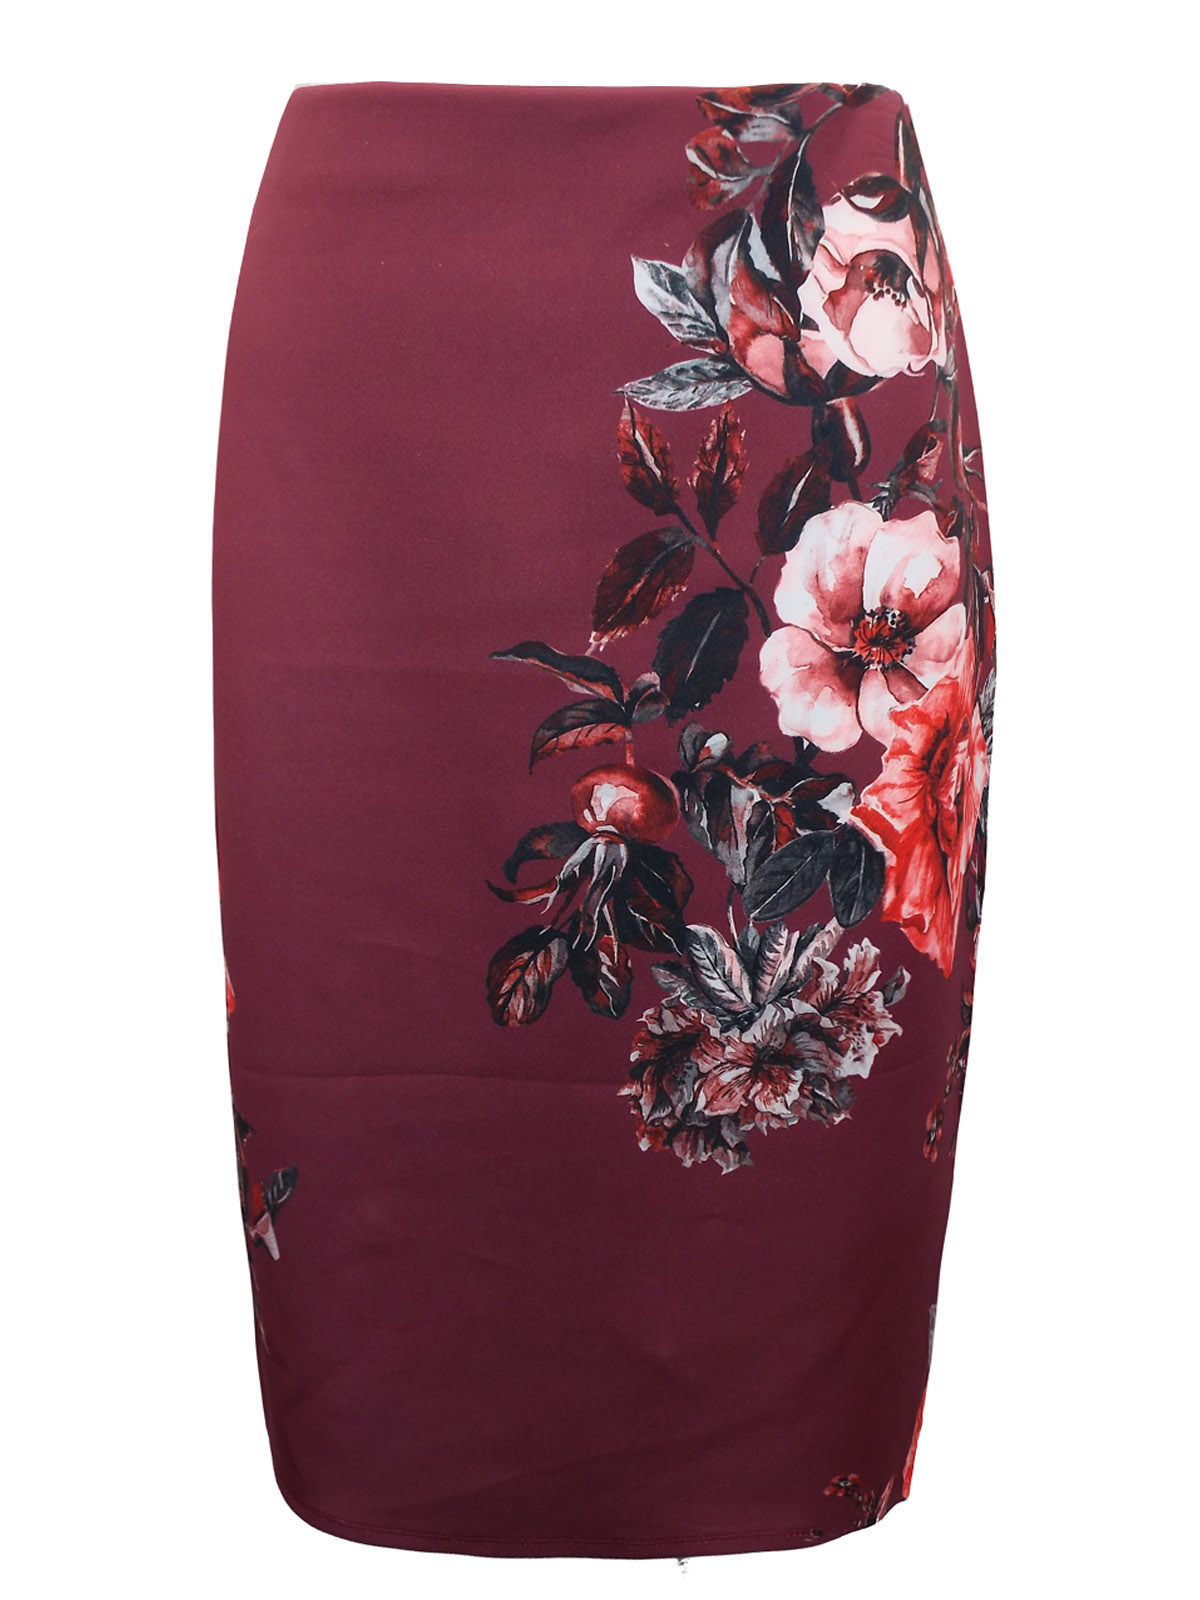 ASSORTED Plain & Printed Midi Skirts - Size 10 to 16